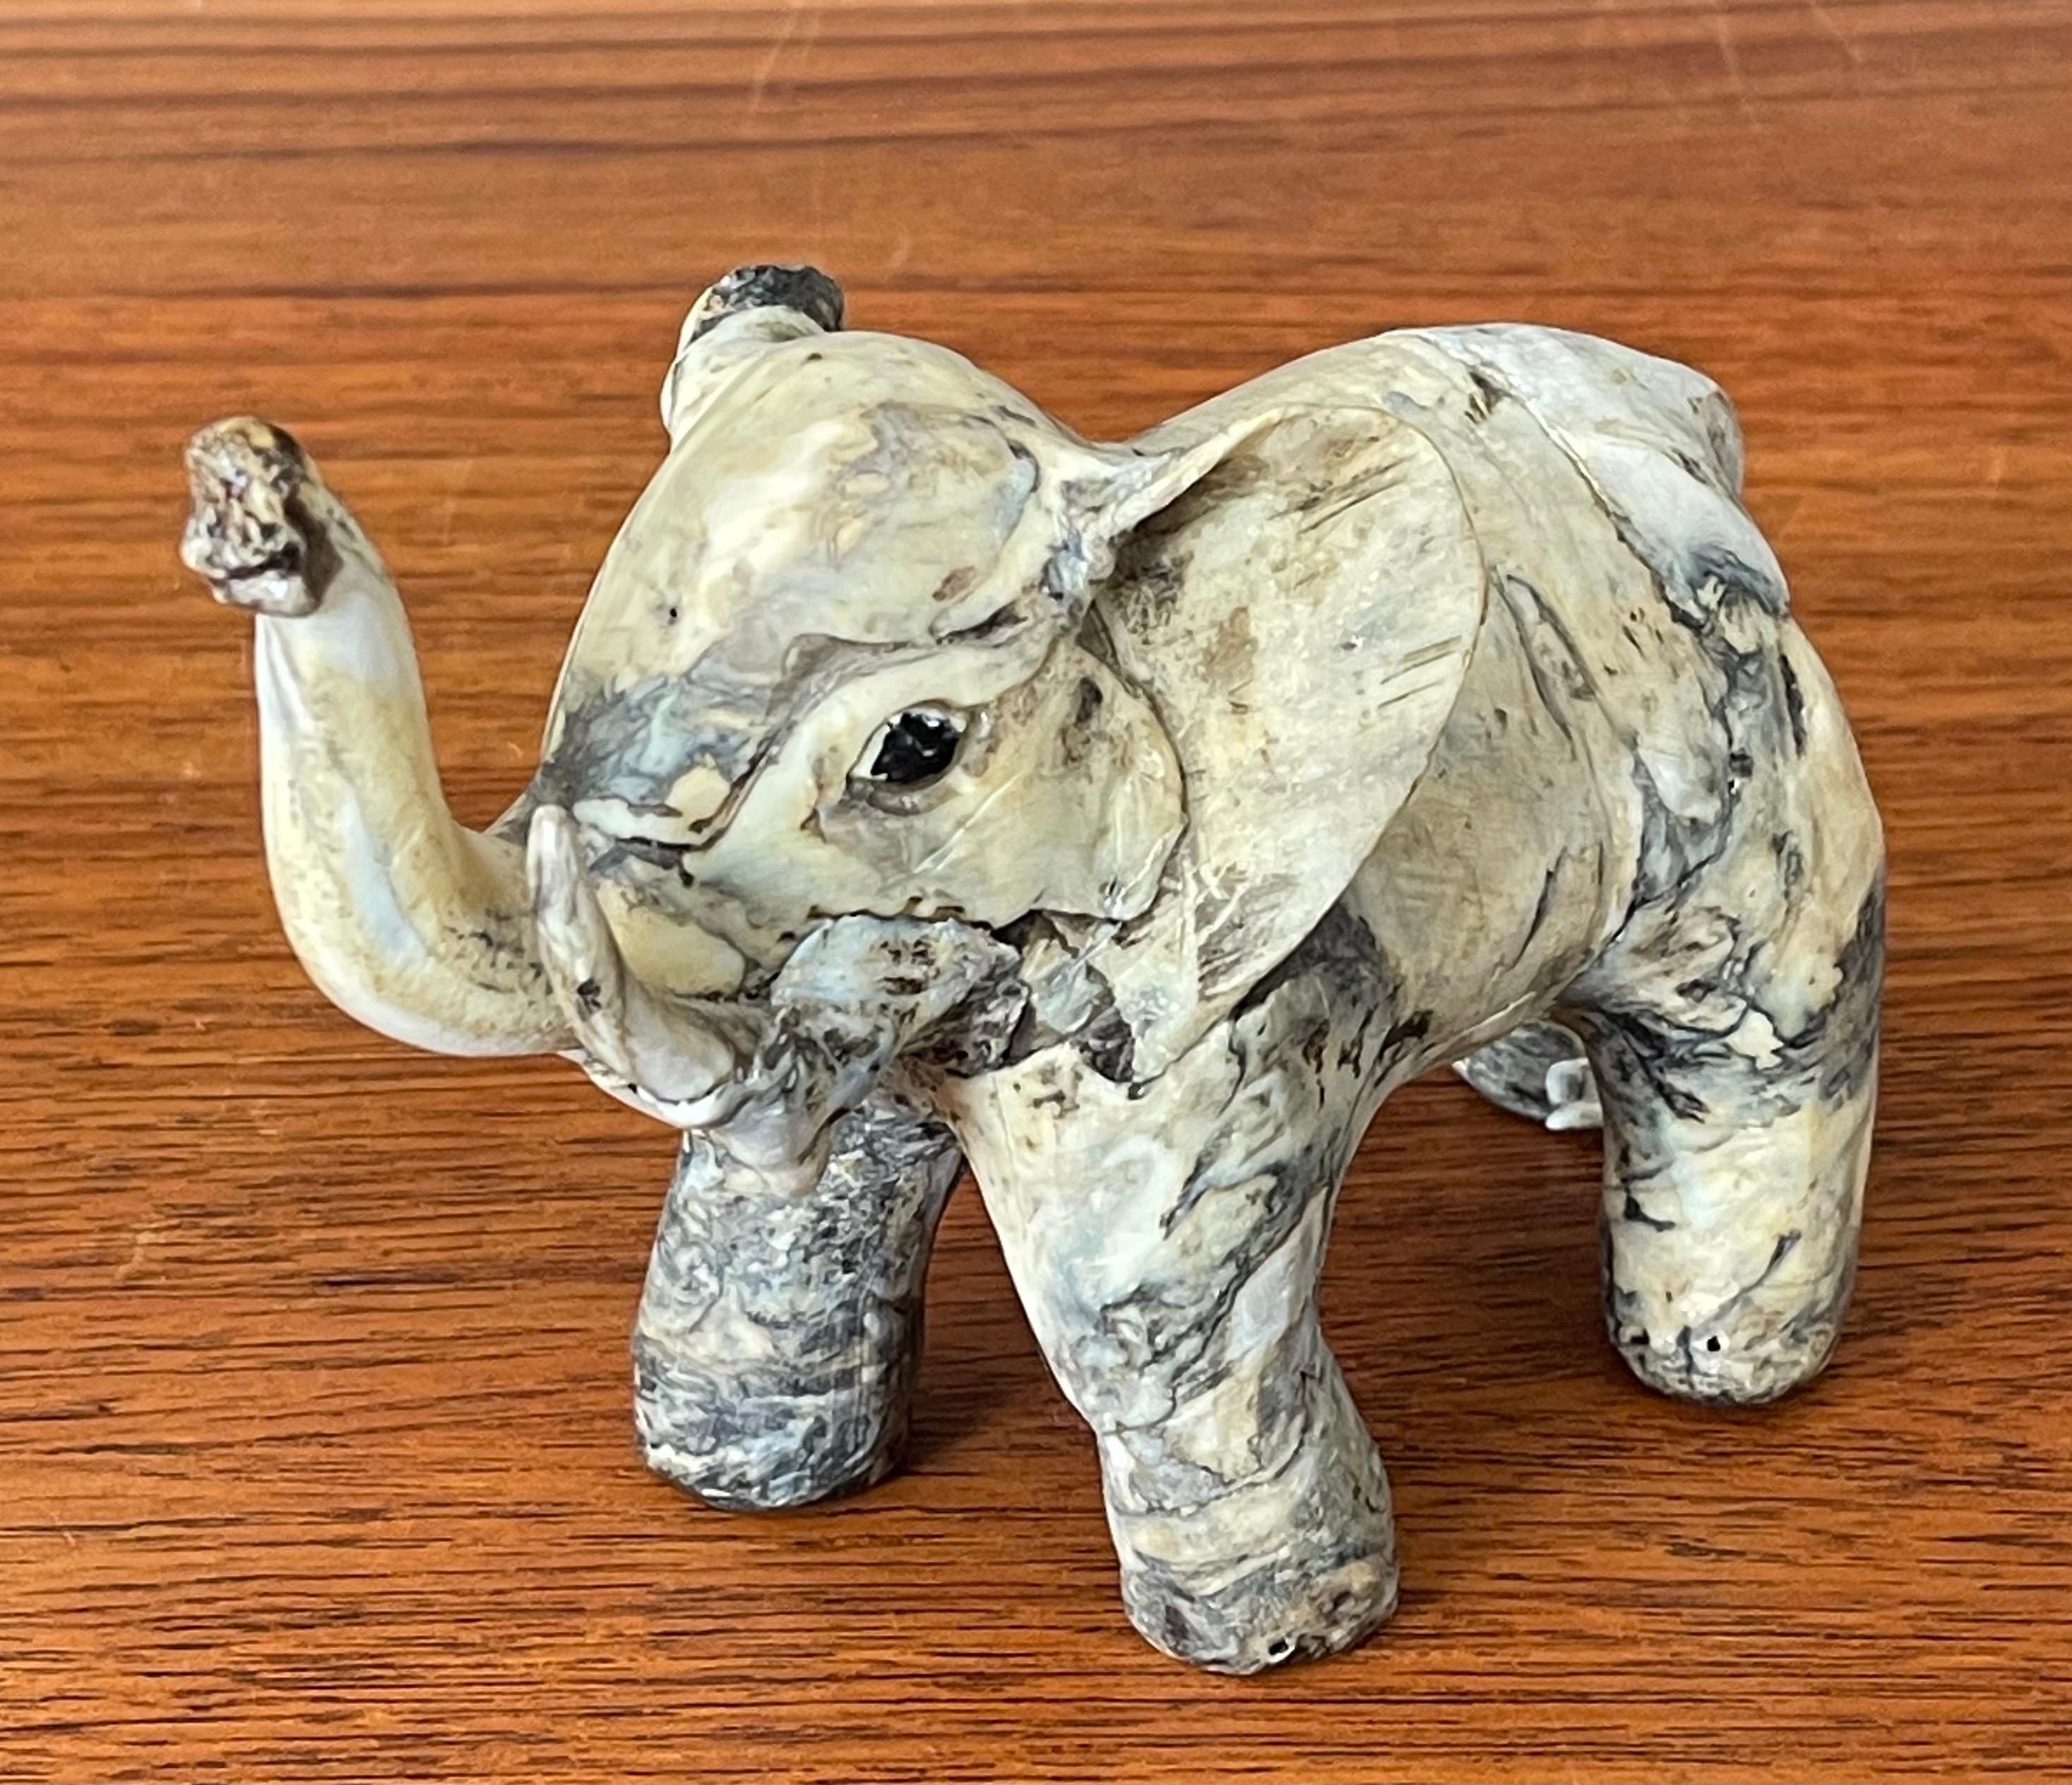 A very cool MCM elephant sculpture, circa 1970s. The piece is in very good vintage condition with no chips or cracks and measures 6